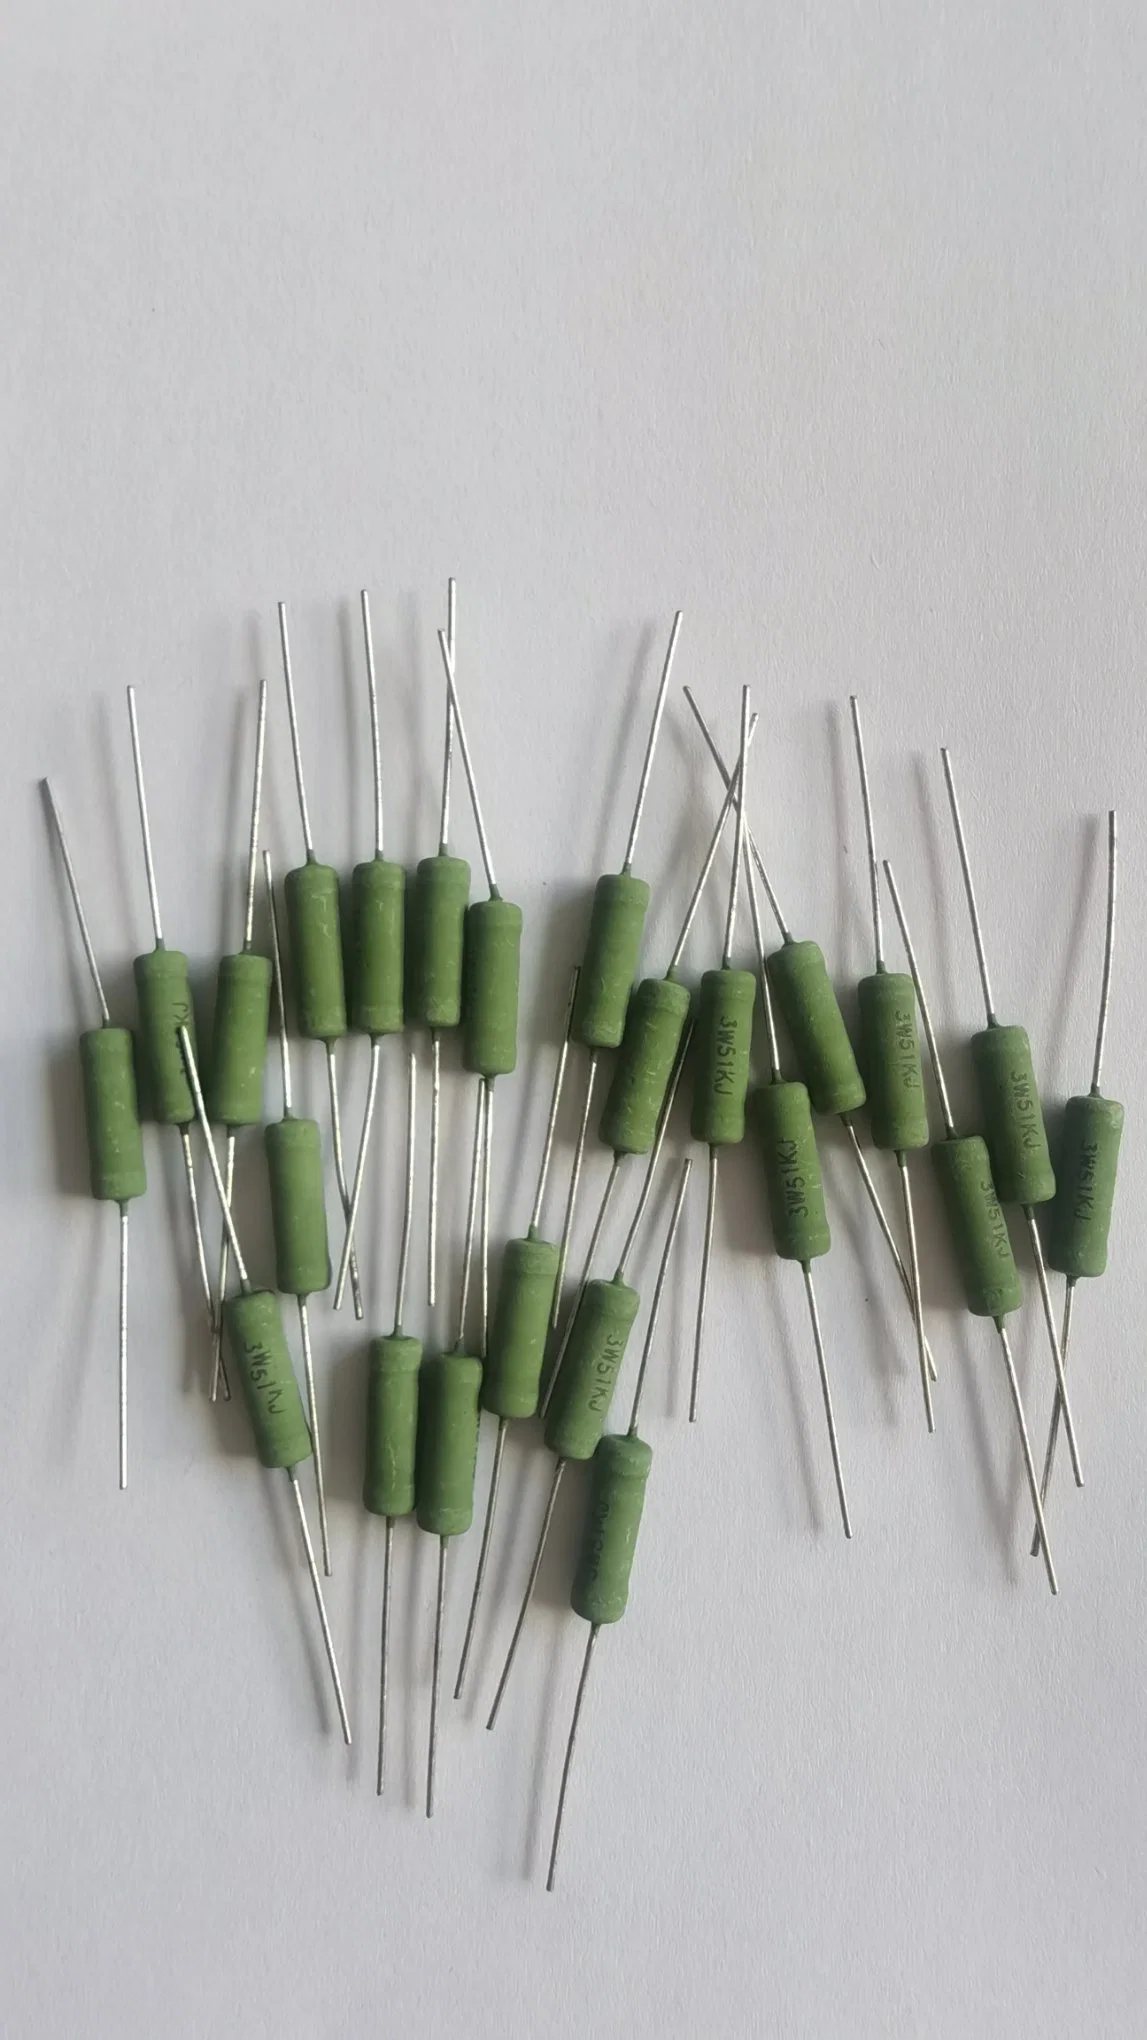 Wirewound Resistors with Knp Type Standard, Used for Various Consumer Devices